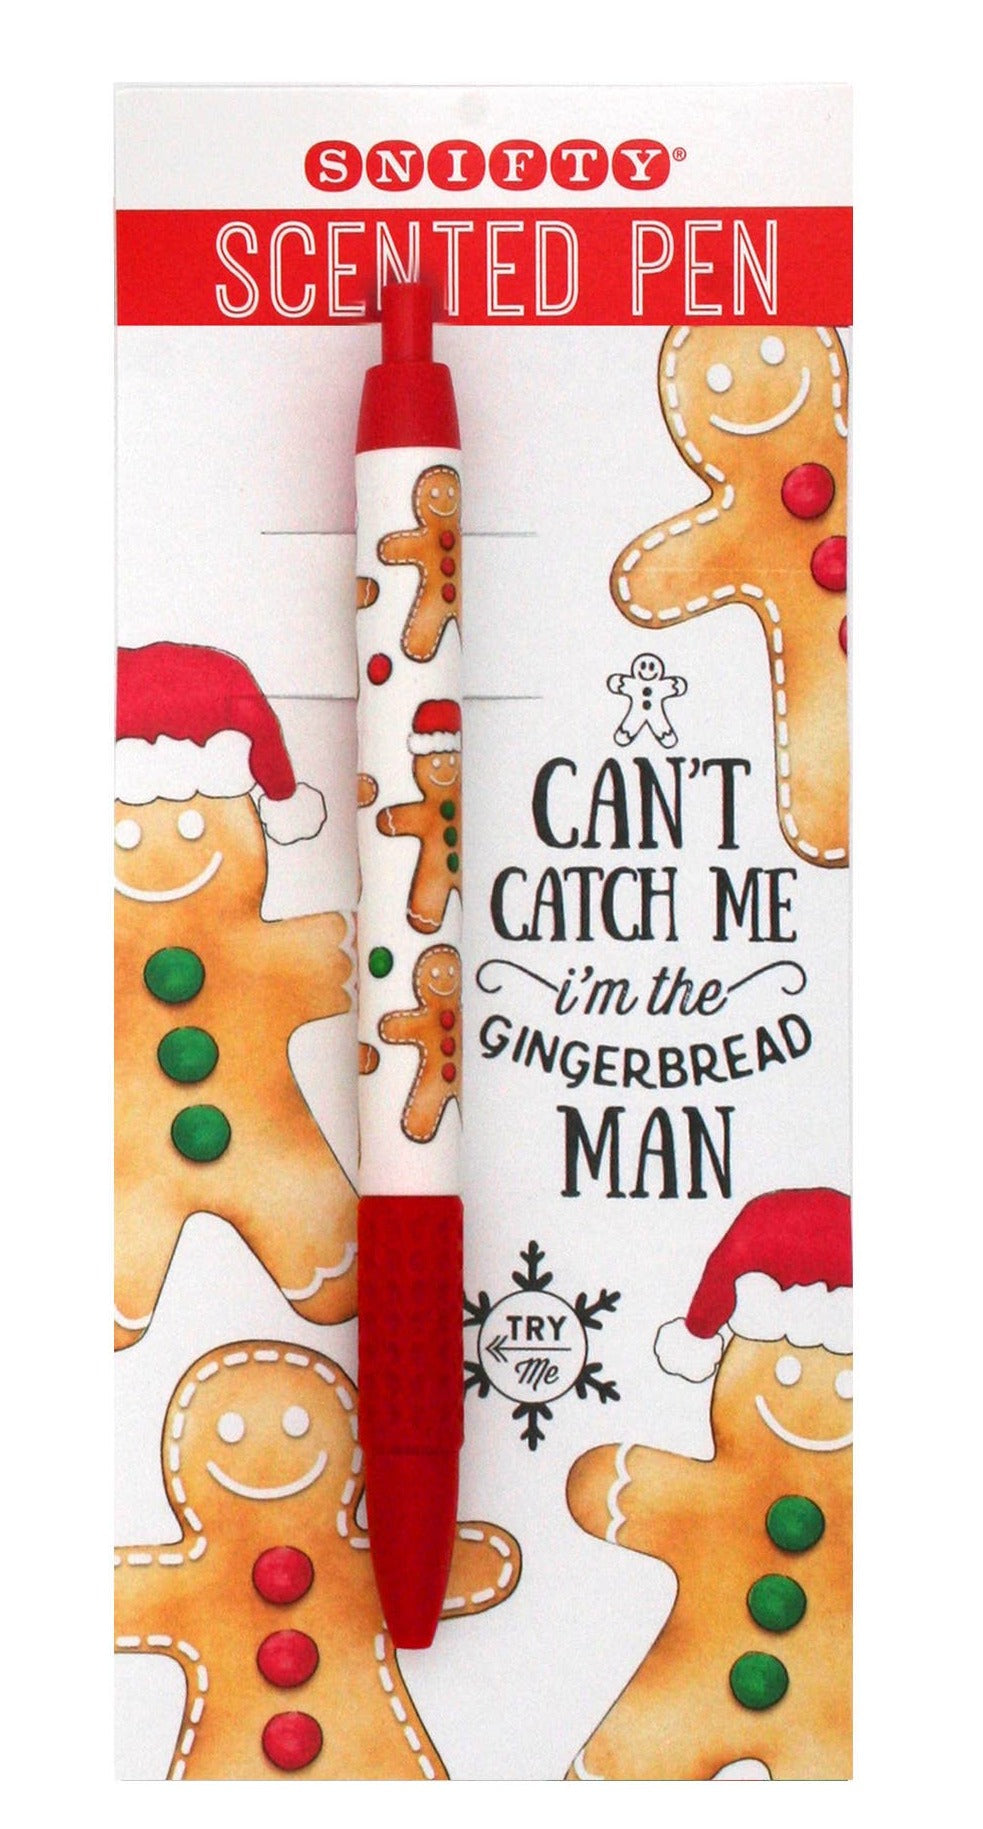 GINGERBREAD HOLIDAY SCENTED PEN CARDED - SET OF 6 SNIFTY Christmas Holiday Games & Crafts Bonjour Fete - Party Supplies